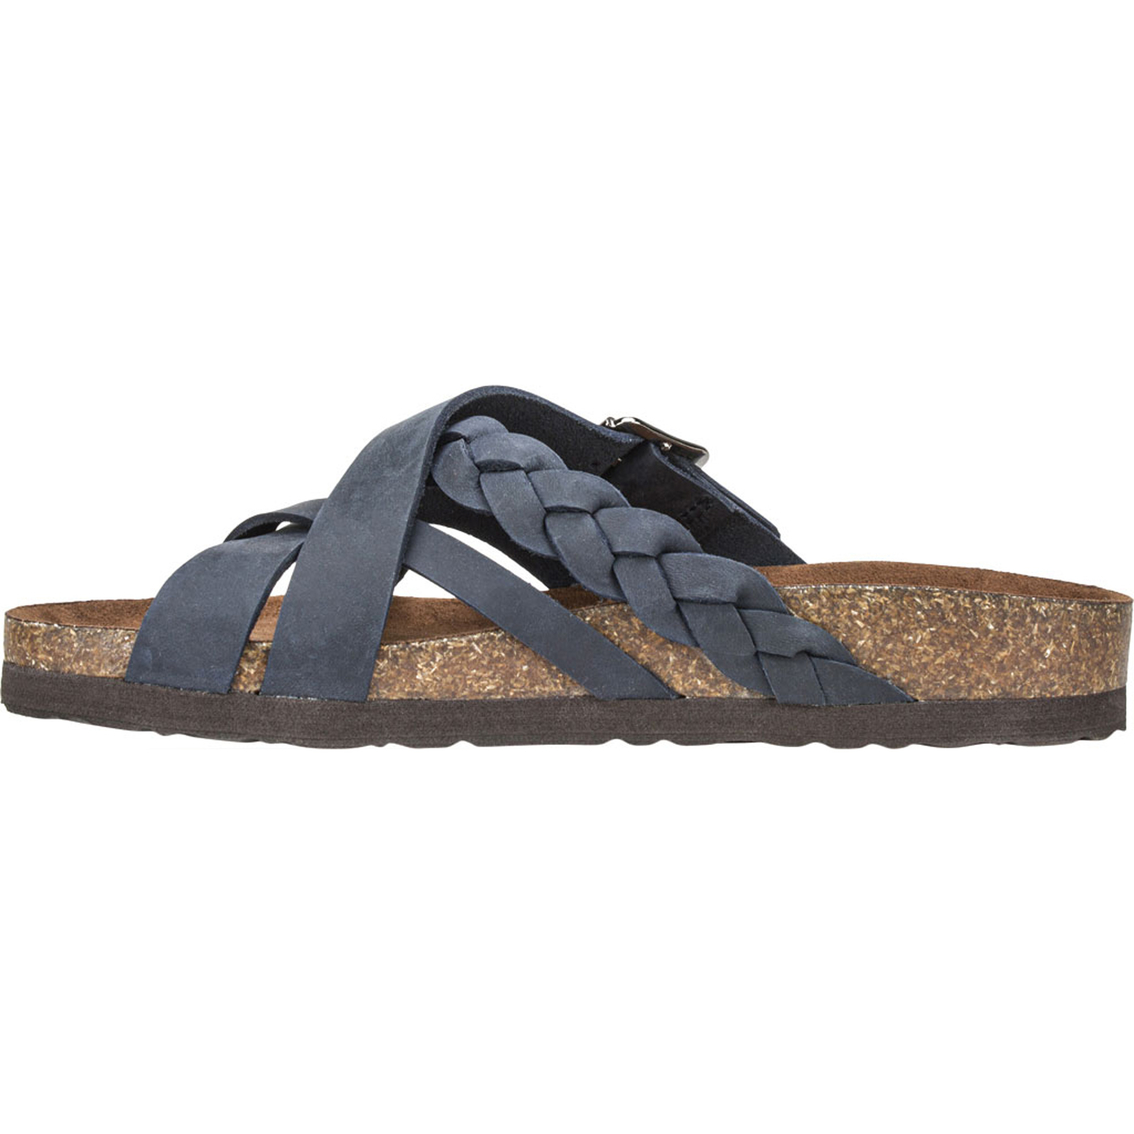 White Mountain Women's Harrington Leather Footbed Sandals - Image 3 of 5